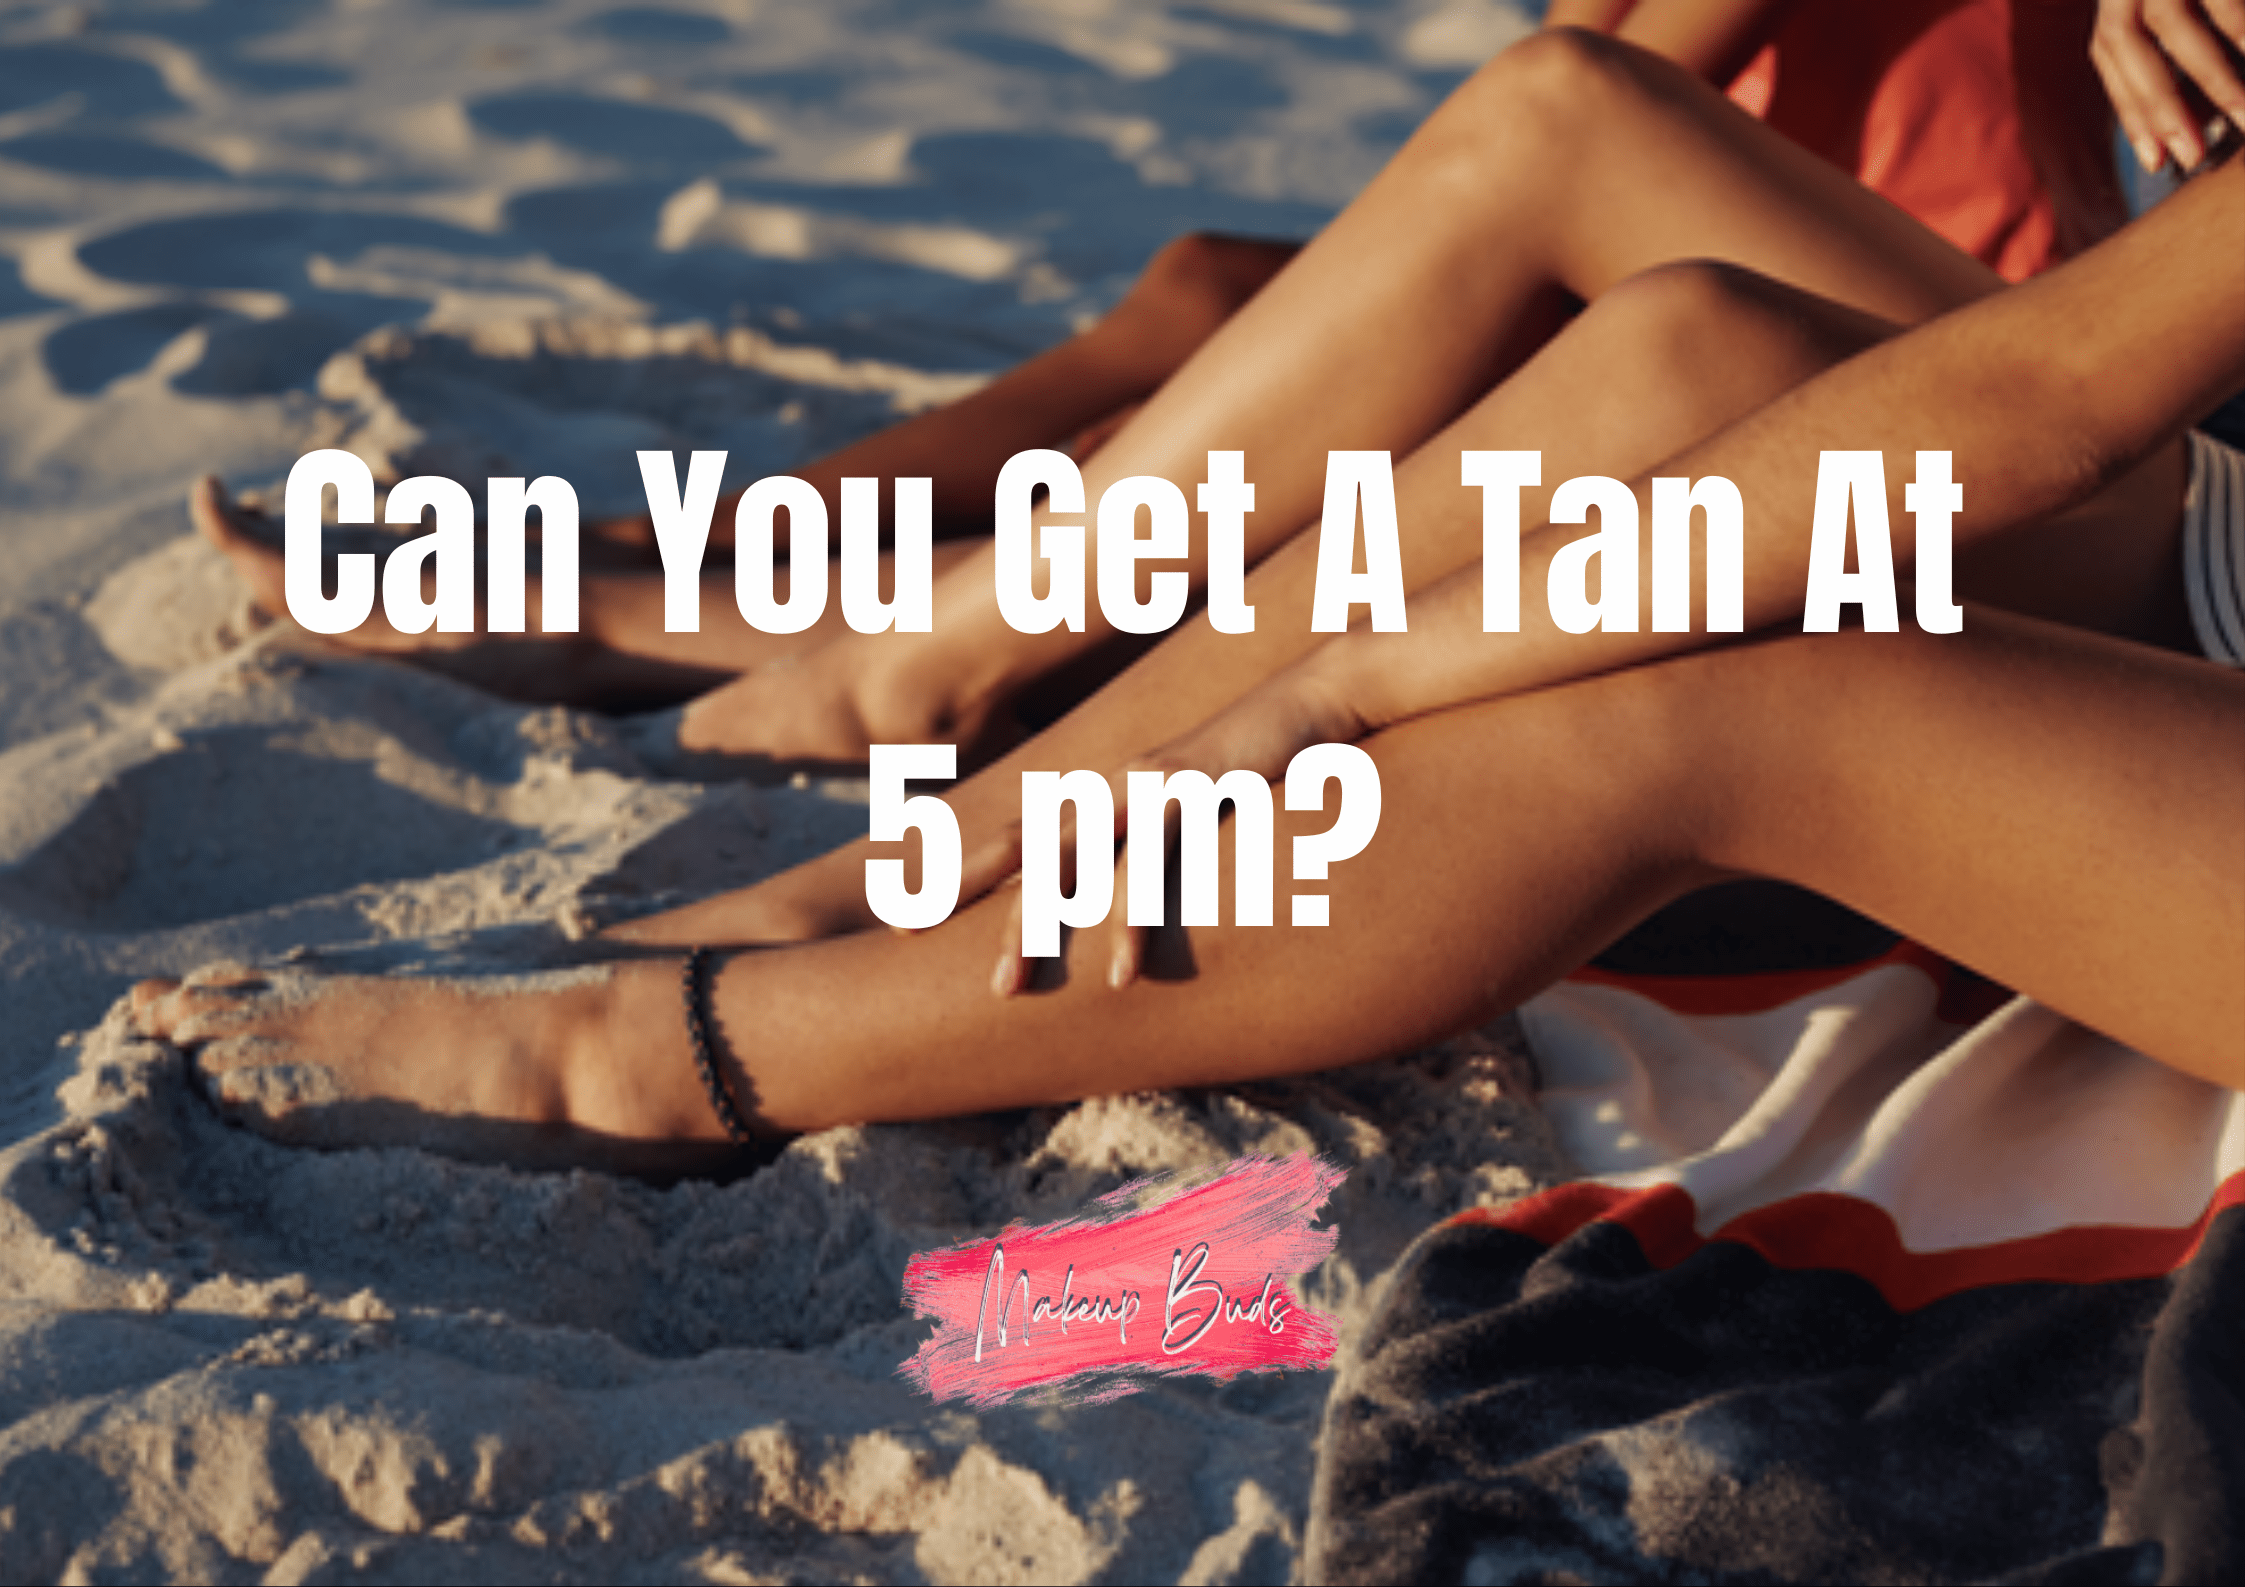 Can You Get A Tan At 5 pm?